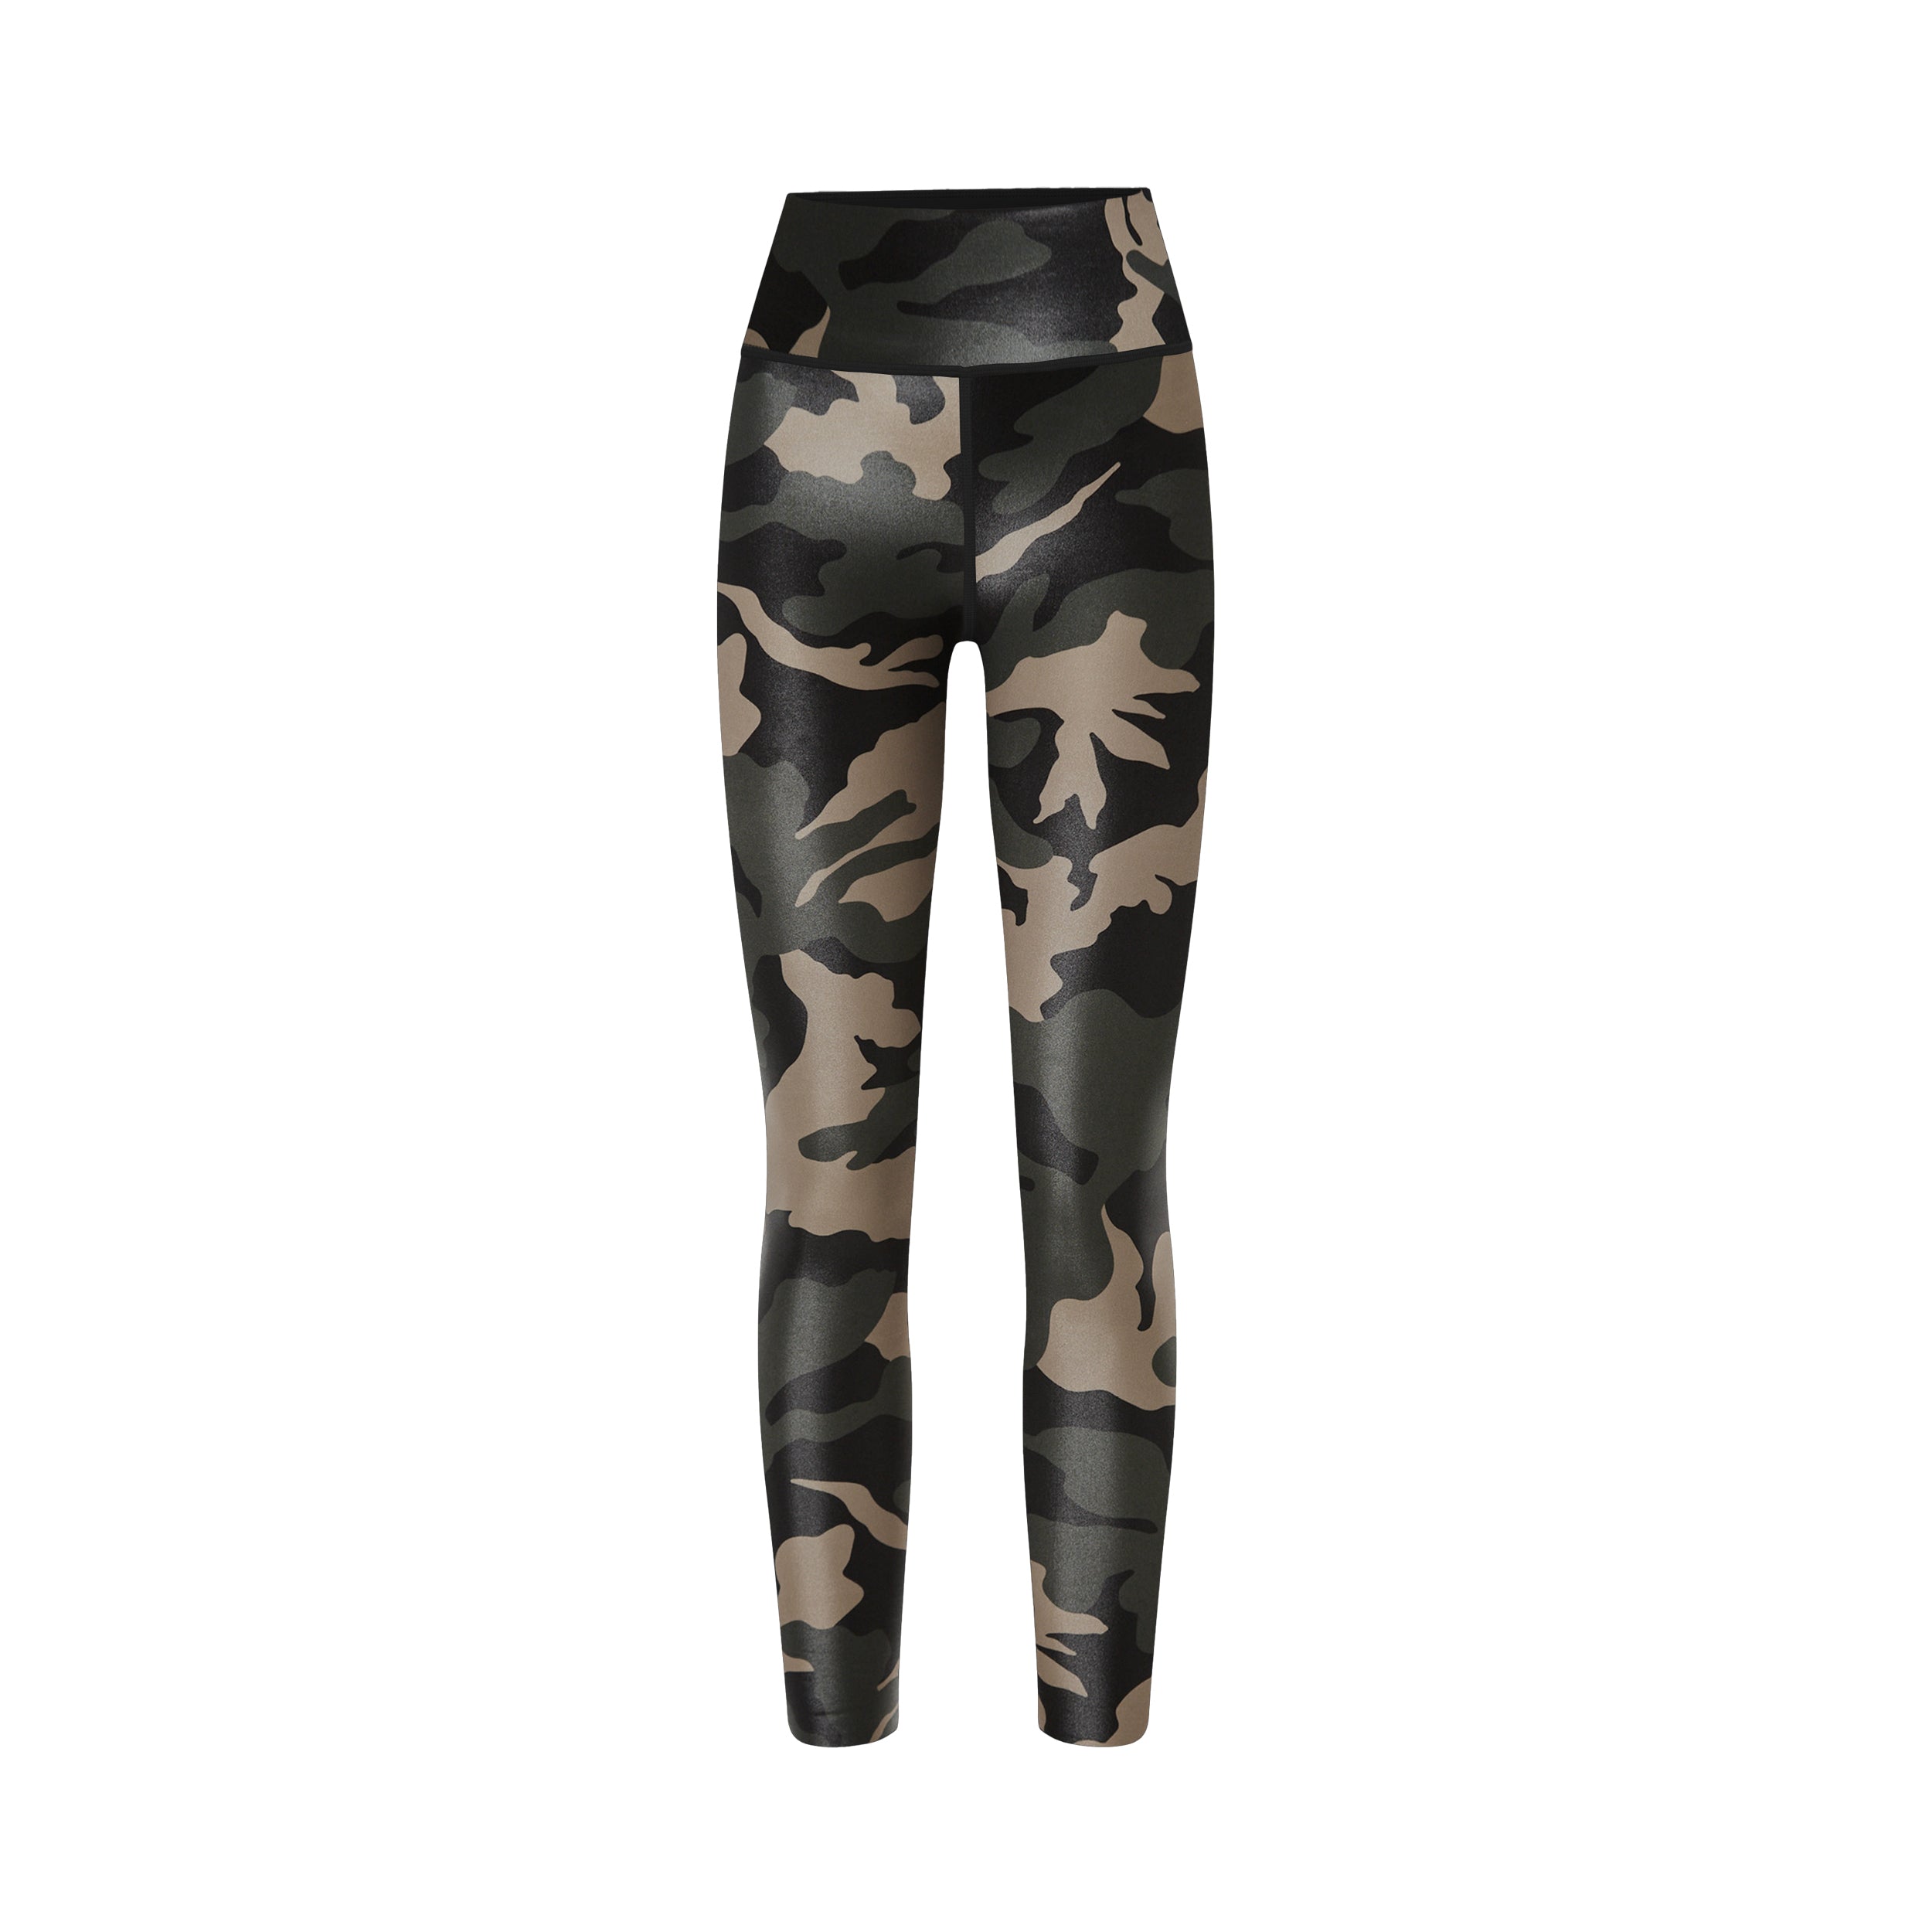 Product view of lightweight, lustrous shine, quick drying camo printed liquid leggings